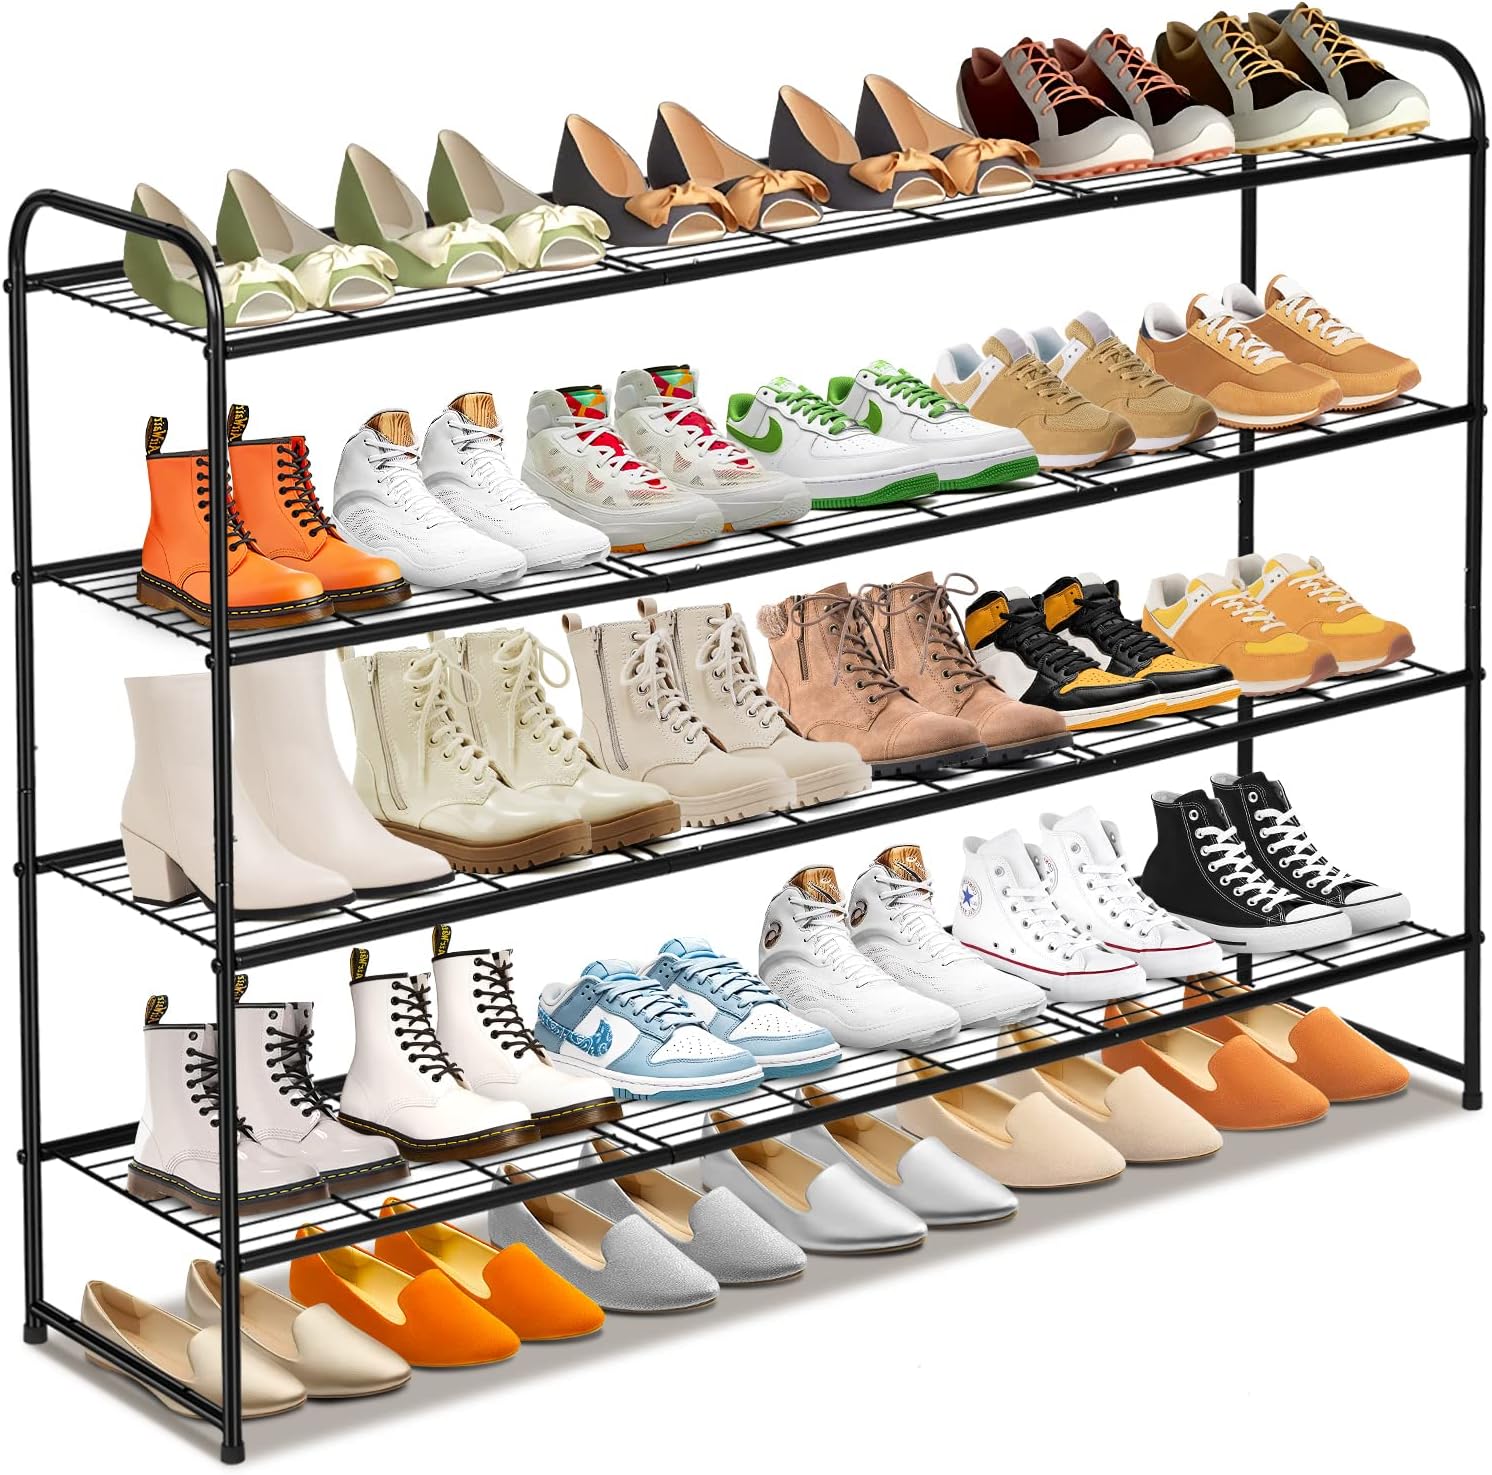 I have moved many times and tried many different shoe racks, but this one is hands down the best. SUPER easy to install, sturdy, and holds a lot! It is the perfect length and height for the garage, making it look neat! Highly recommend!